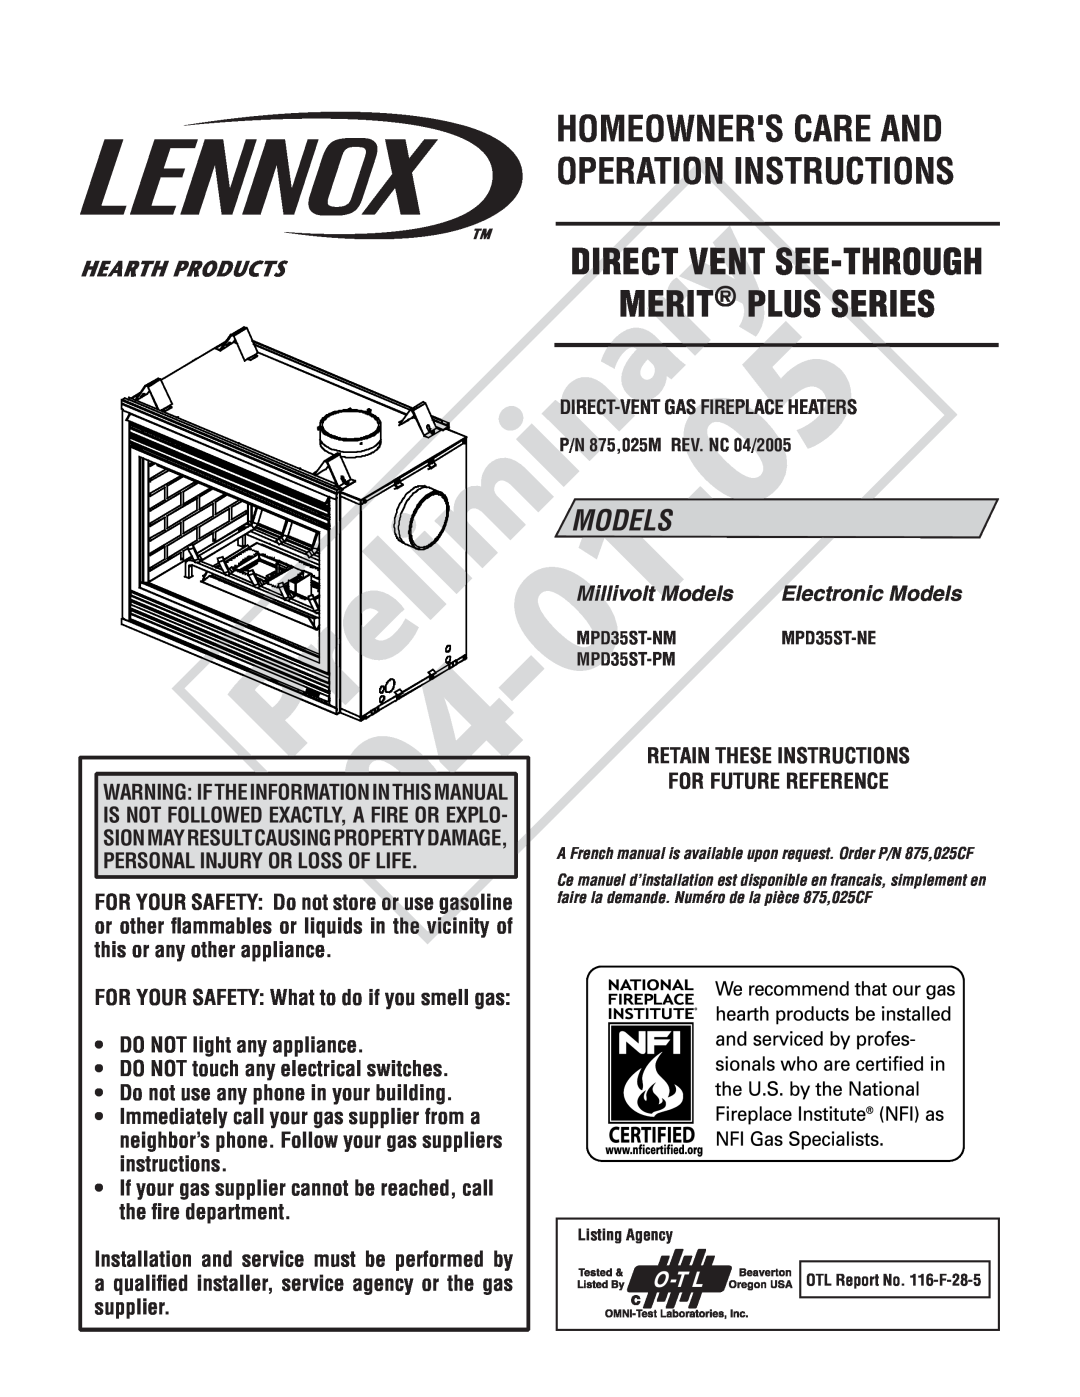 Lennox Hearth MPD35ST-PM, MPD35ST-NM manual Electronic Models, Millivolt Models, this or any other appliance, supplier 